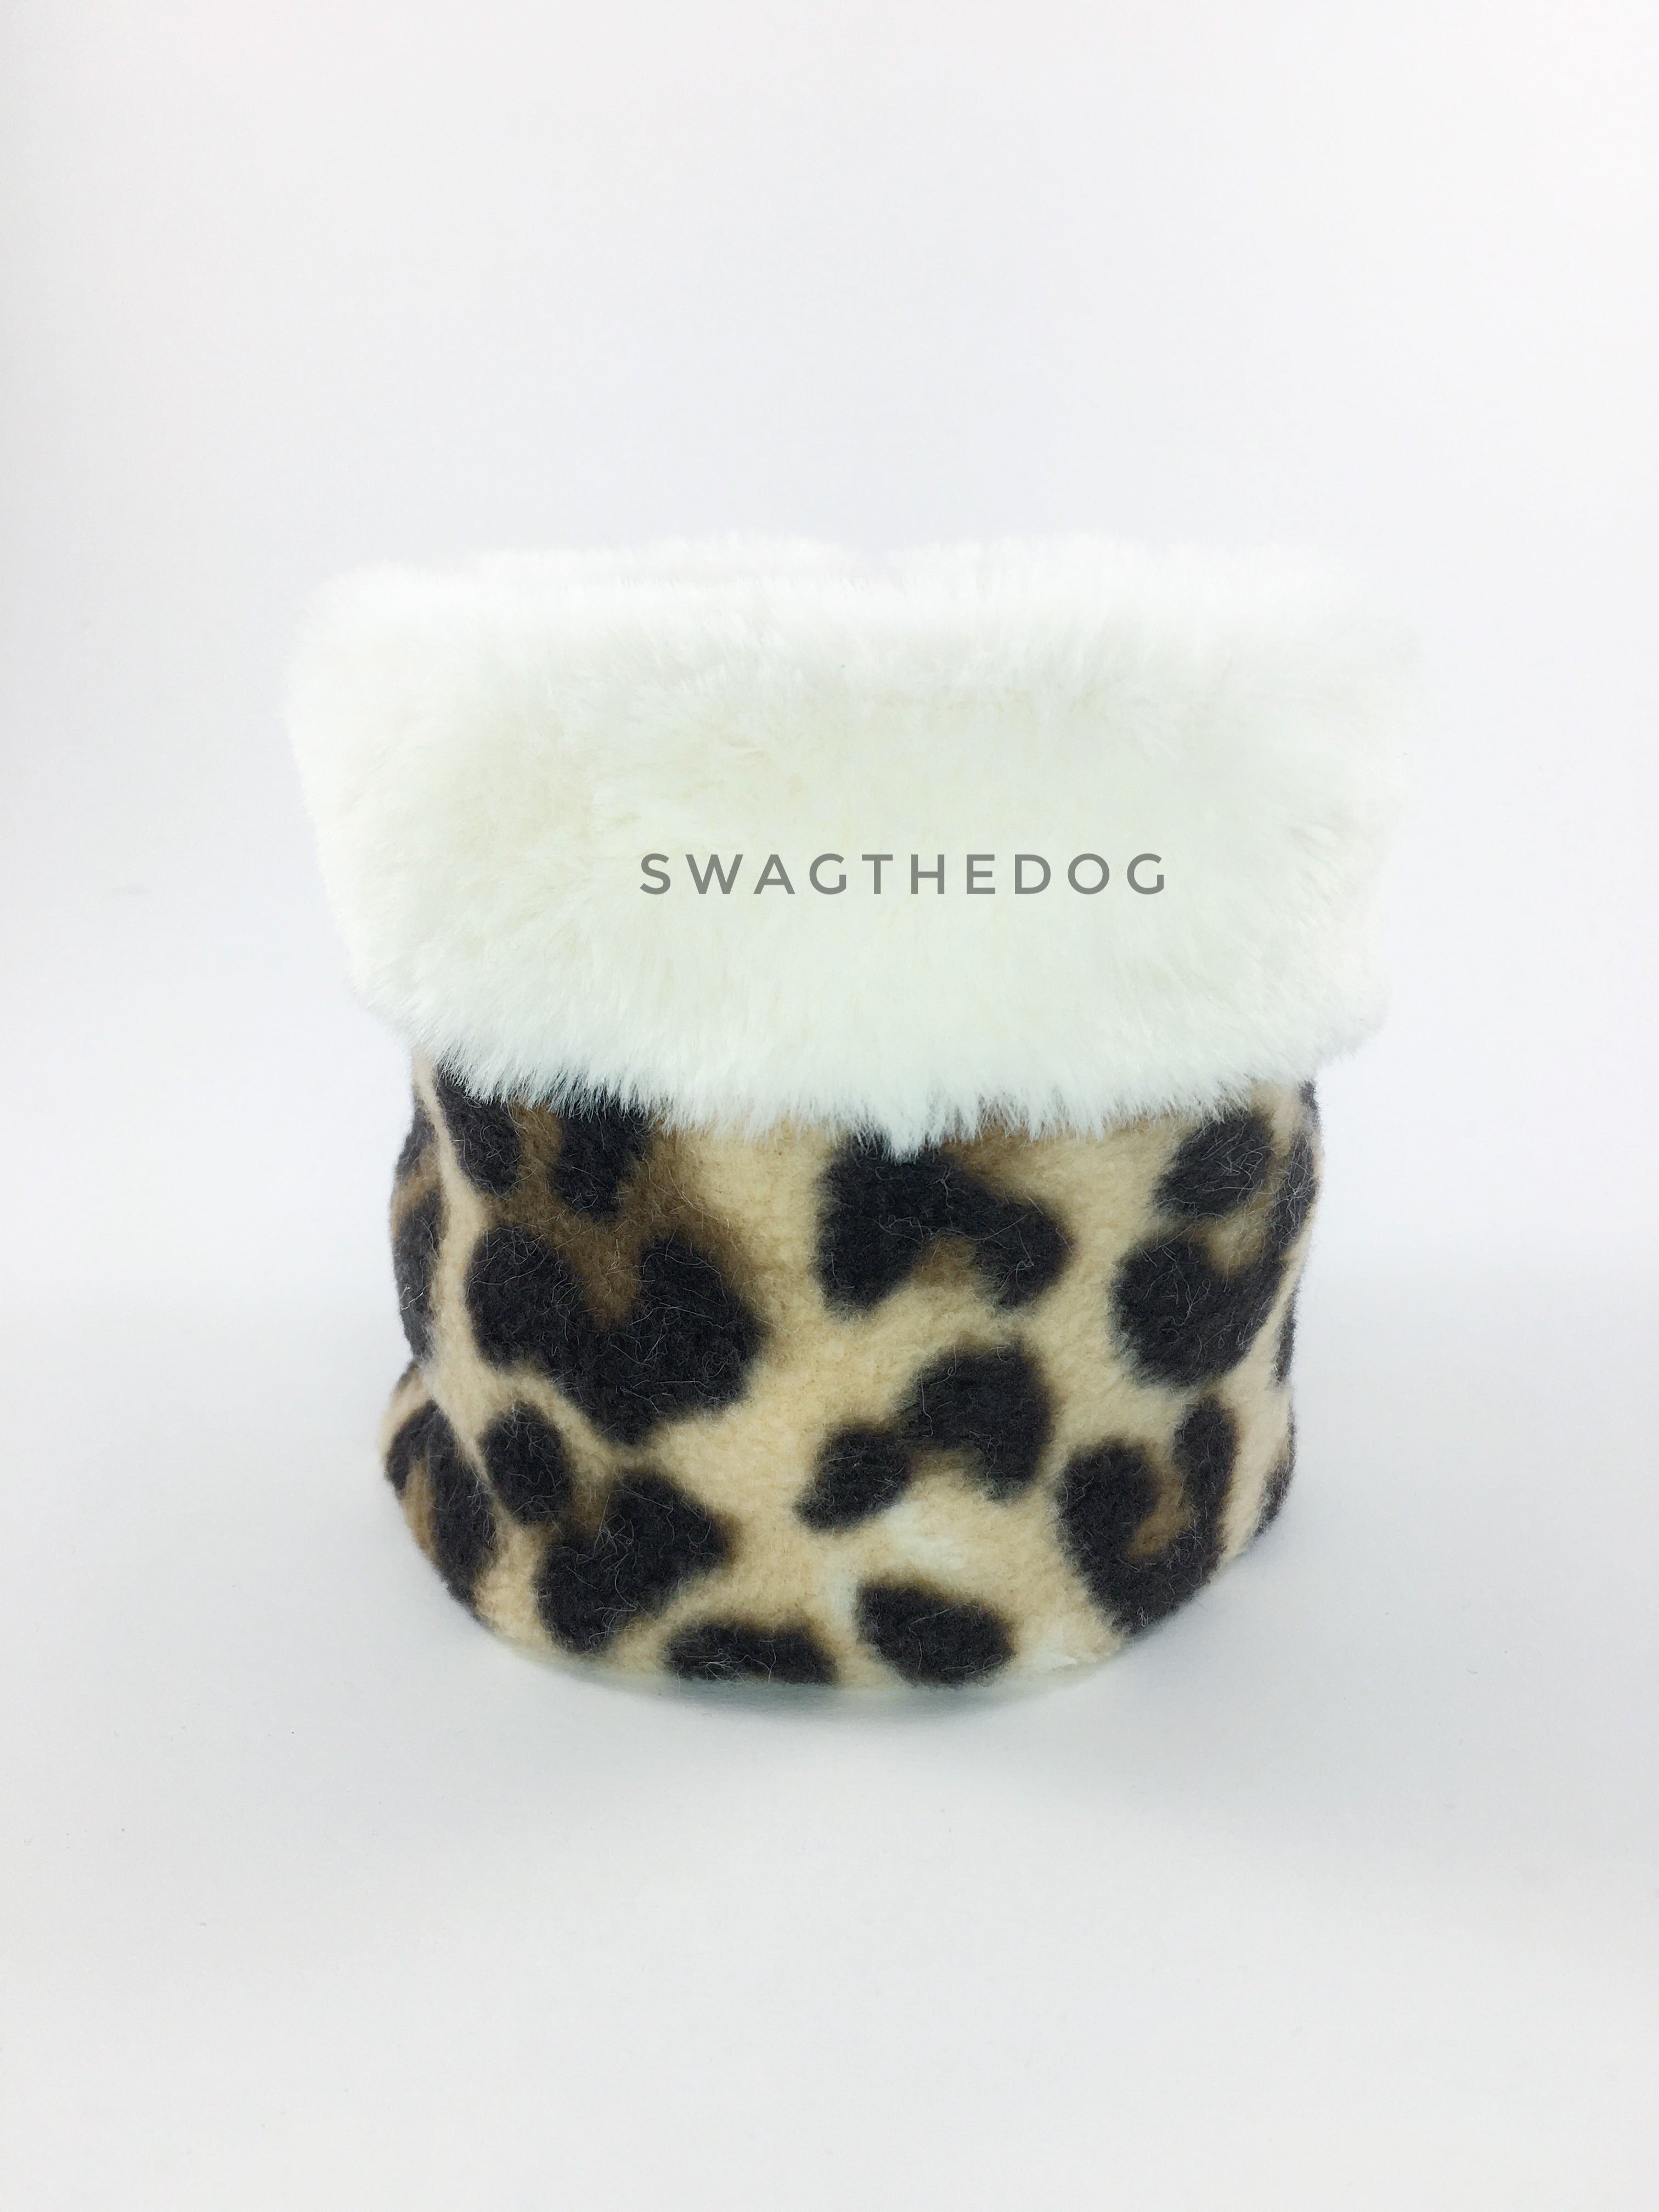 Leopard Swagsnood - Product Front View. Cream faux fur rolled up 1/3 of the snood and 2/3 with leopard print fleece